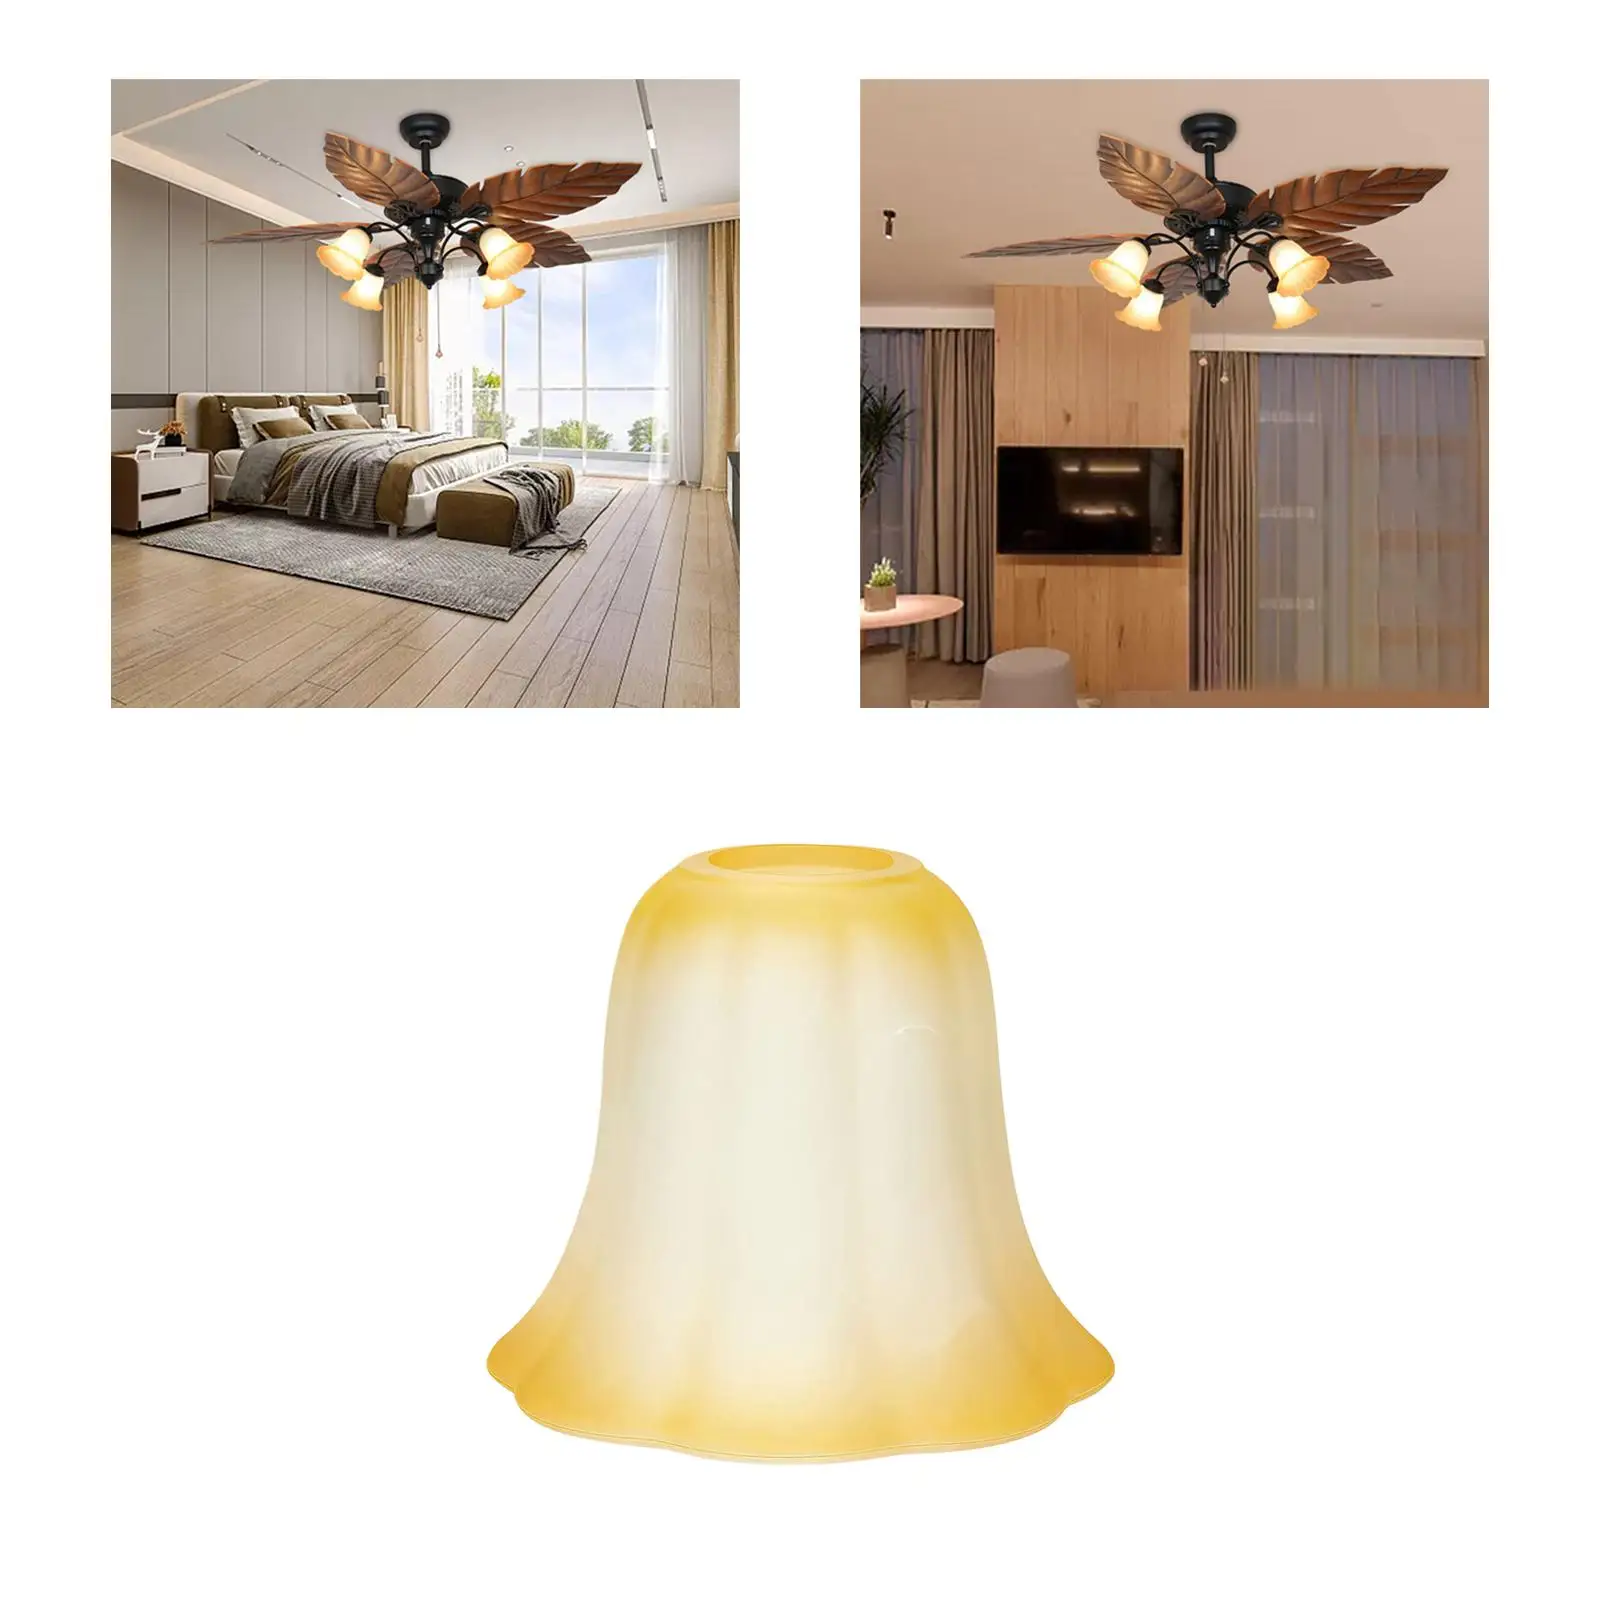 Modern Ceiling Light Fixture Cover Hanging Decorative Frost Glass Lamp Shade